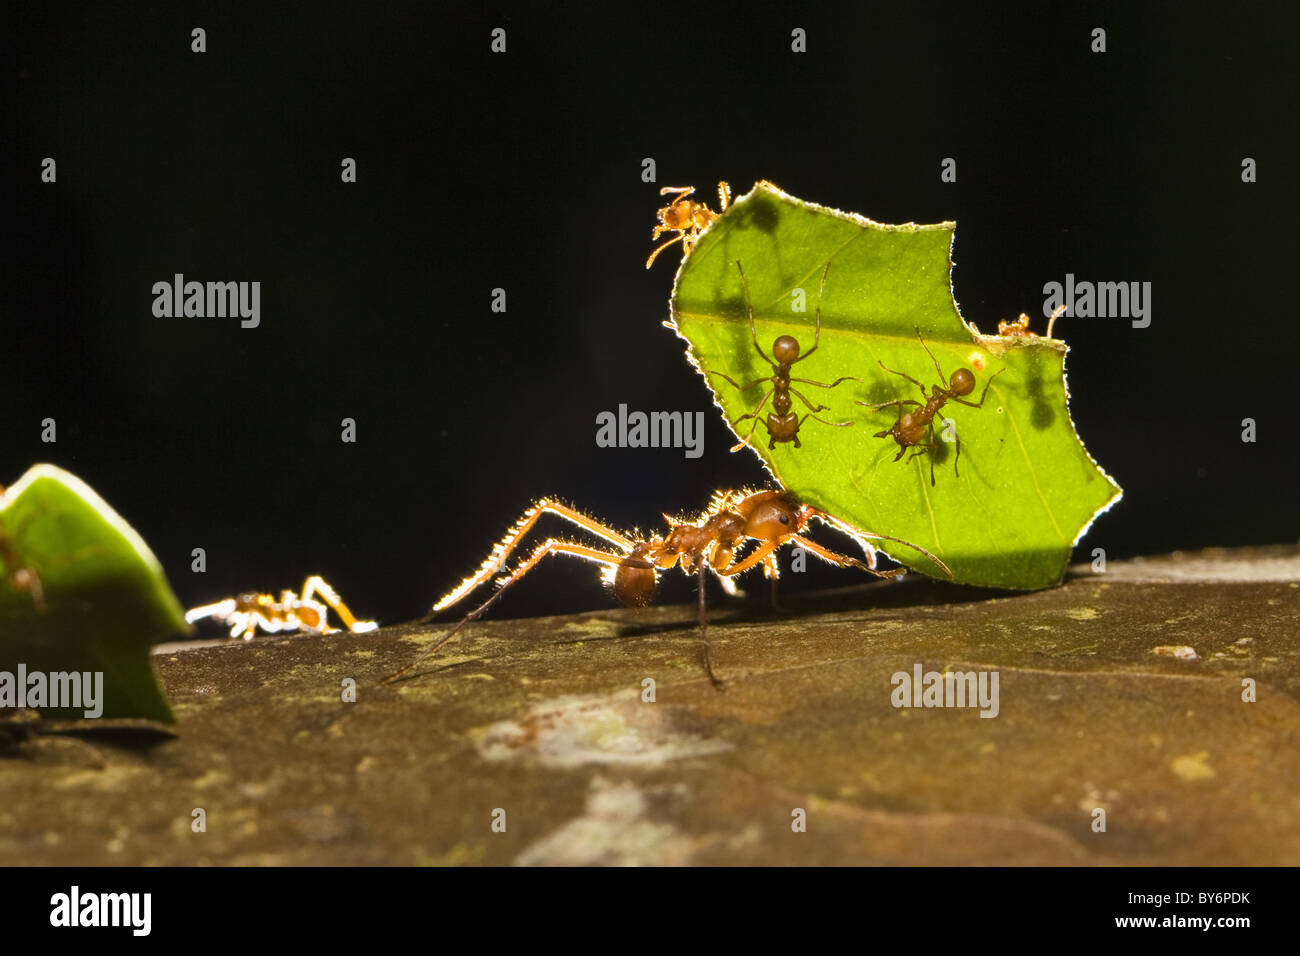 Leafcutter ants carrying pieces of leaves, Atta cephalotes, rainforest, Costa Rica Stock Photo